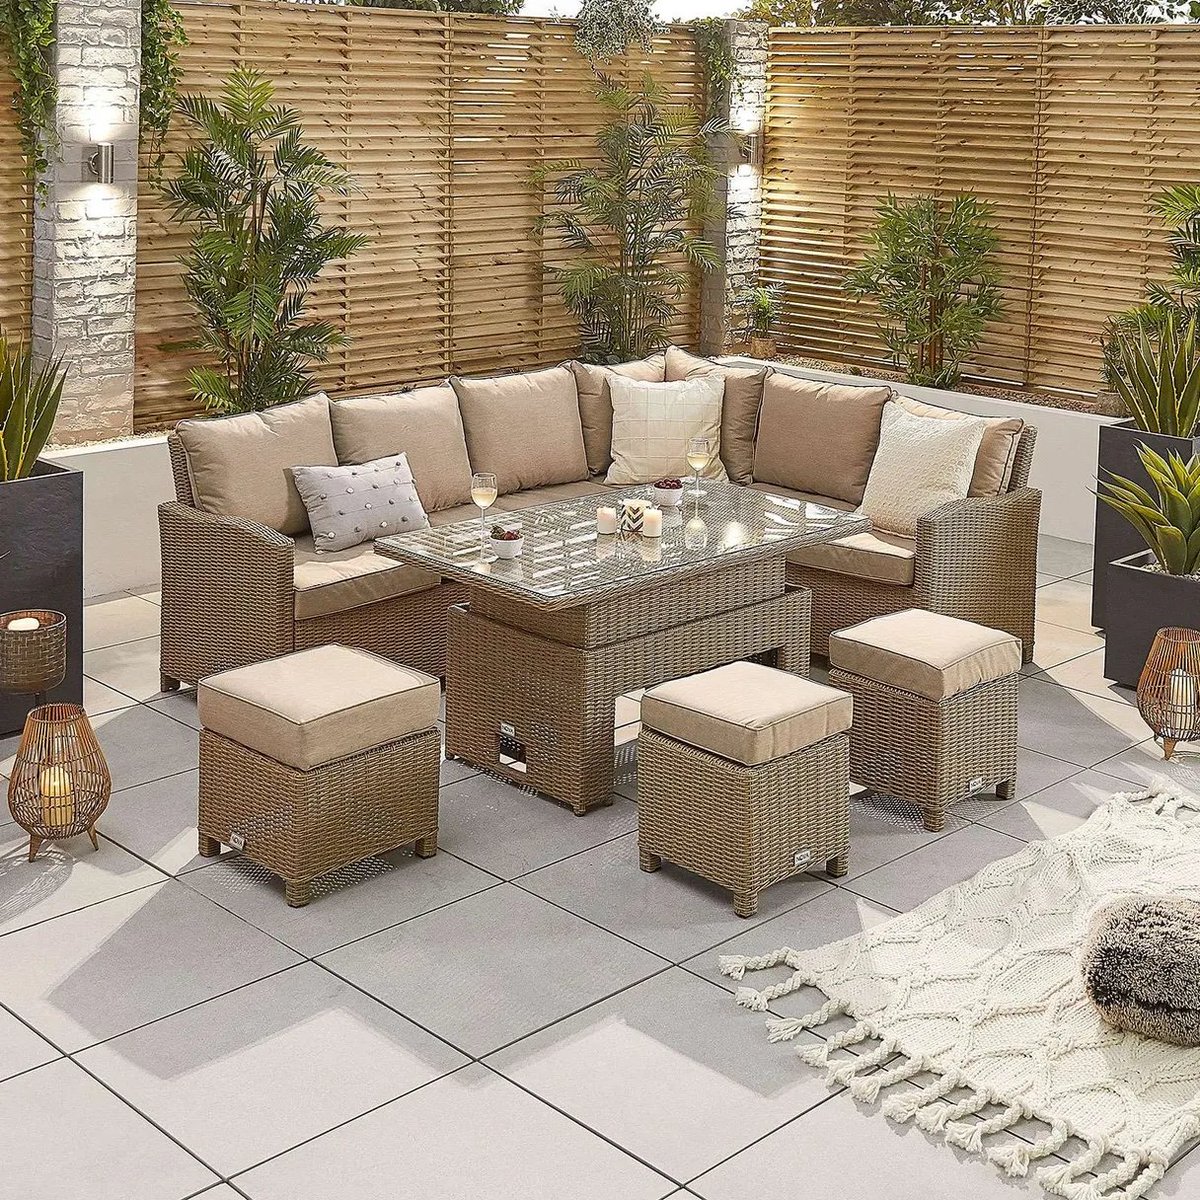 This Aston Ciara left or right hand casual dining set comes complete with a rising table and parasol hole for the best outdoor dinner parties!🤩

Shop now to save with our early bird sale...

bit.ly/3CeulmW

#DiningSet #OutdoorDining #CornerSofa